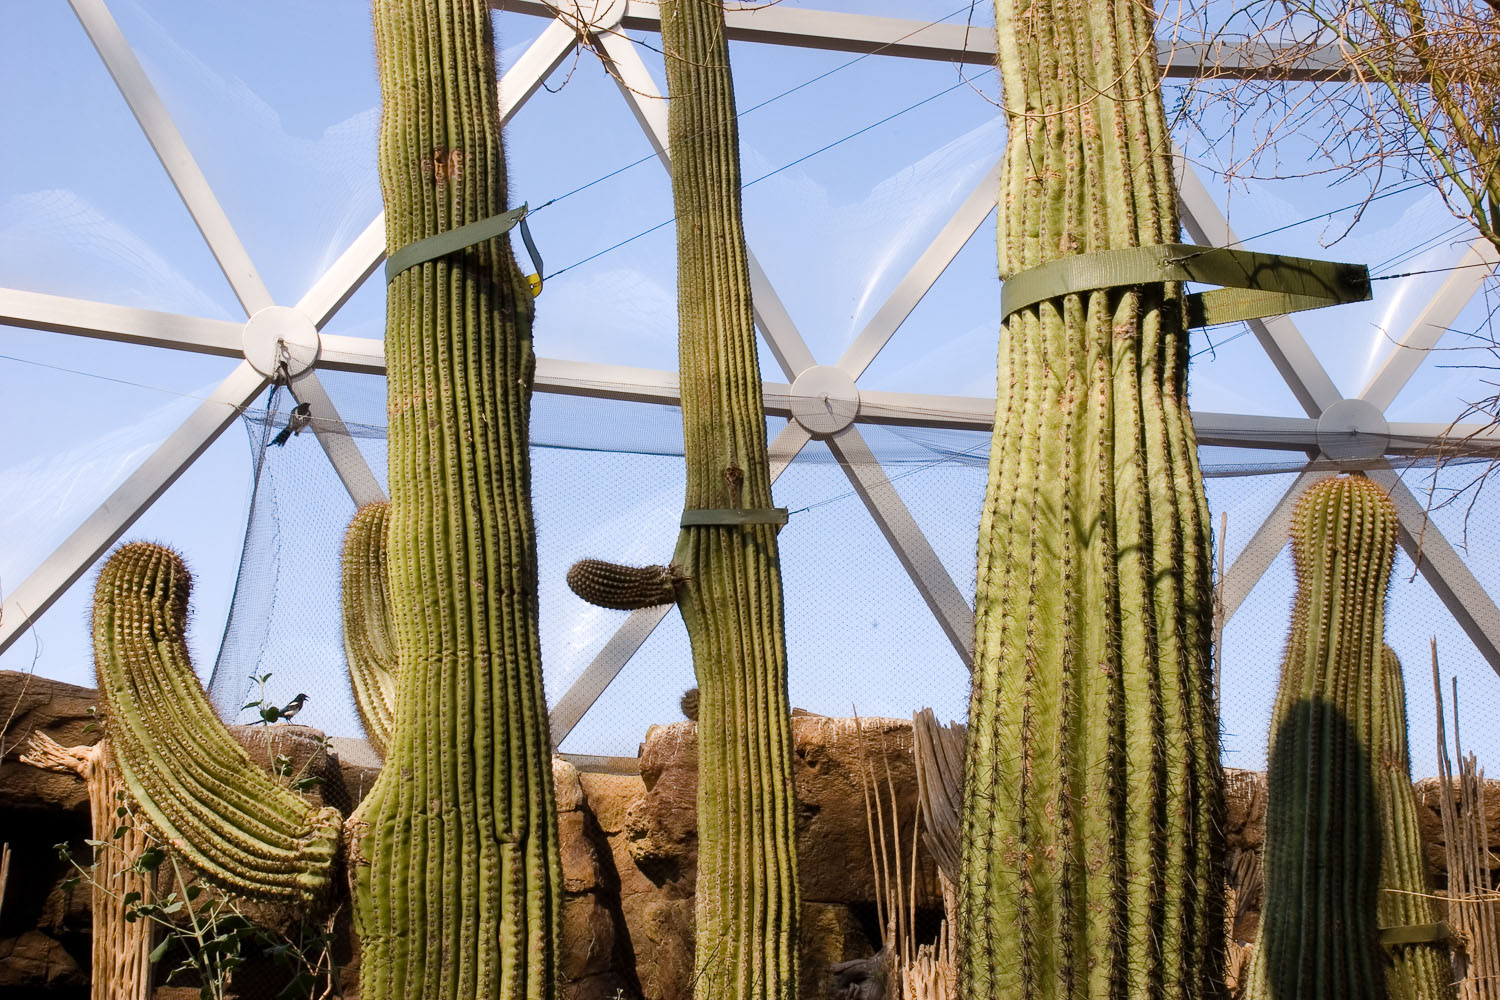 Tethered Saguaros and Netted Magpies, Desert Dome